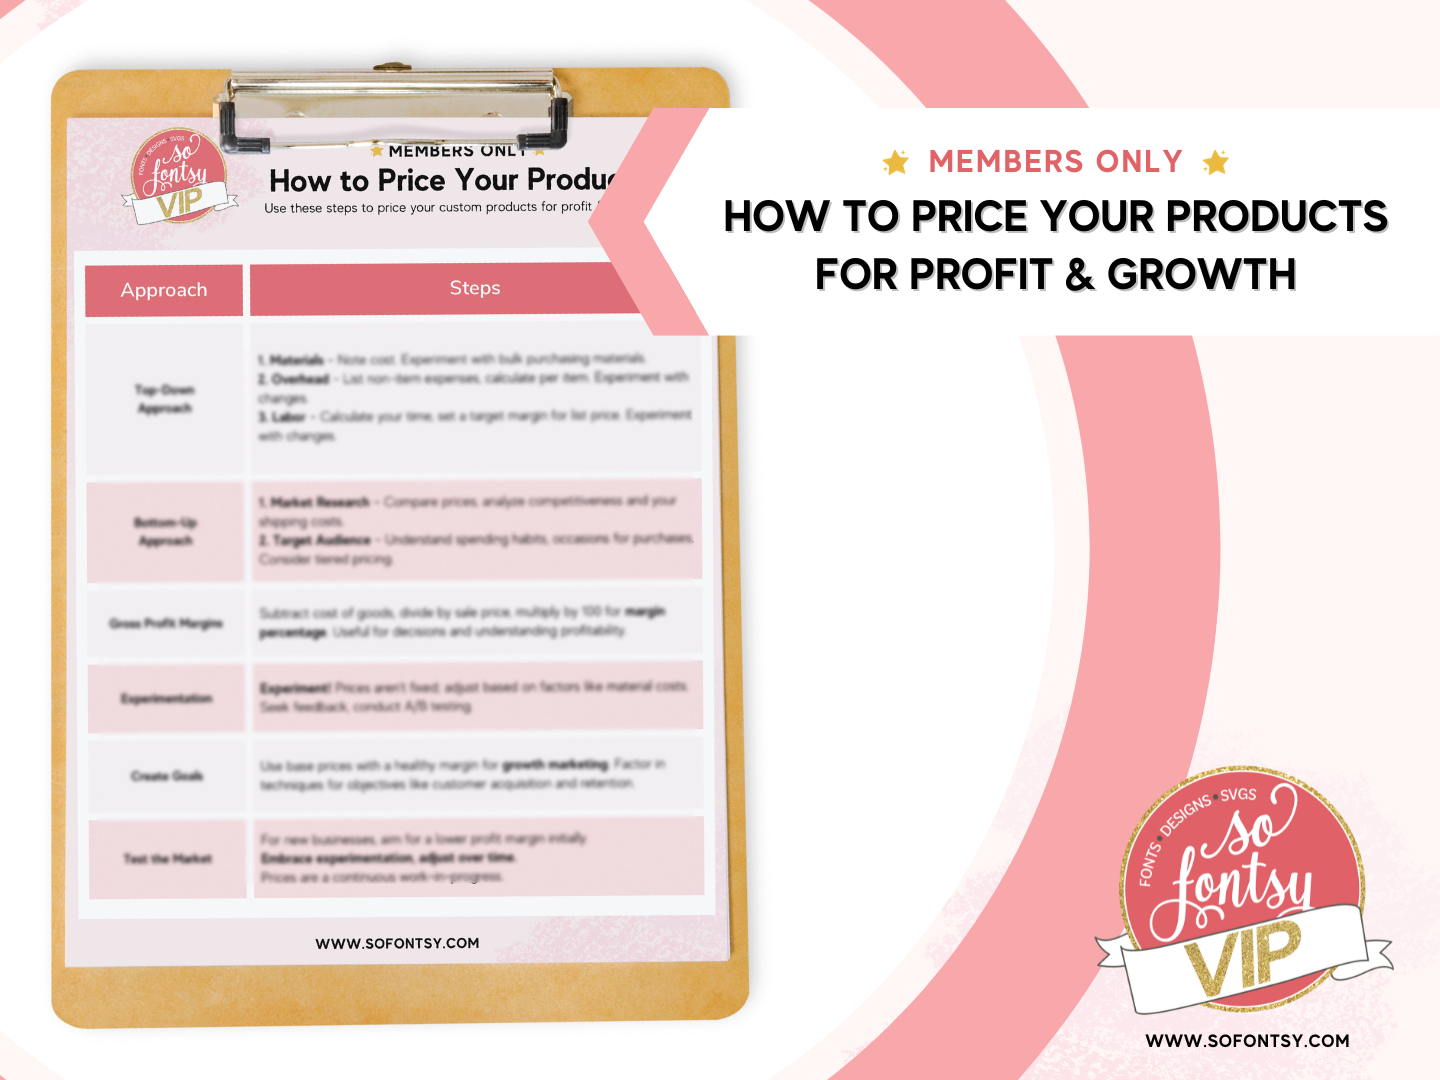 How to Price Your Products For Profit & Growth